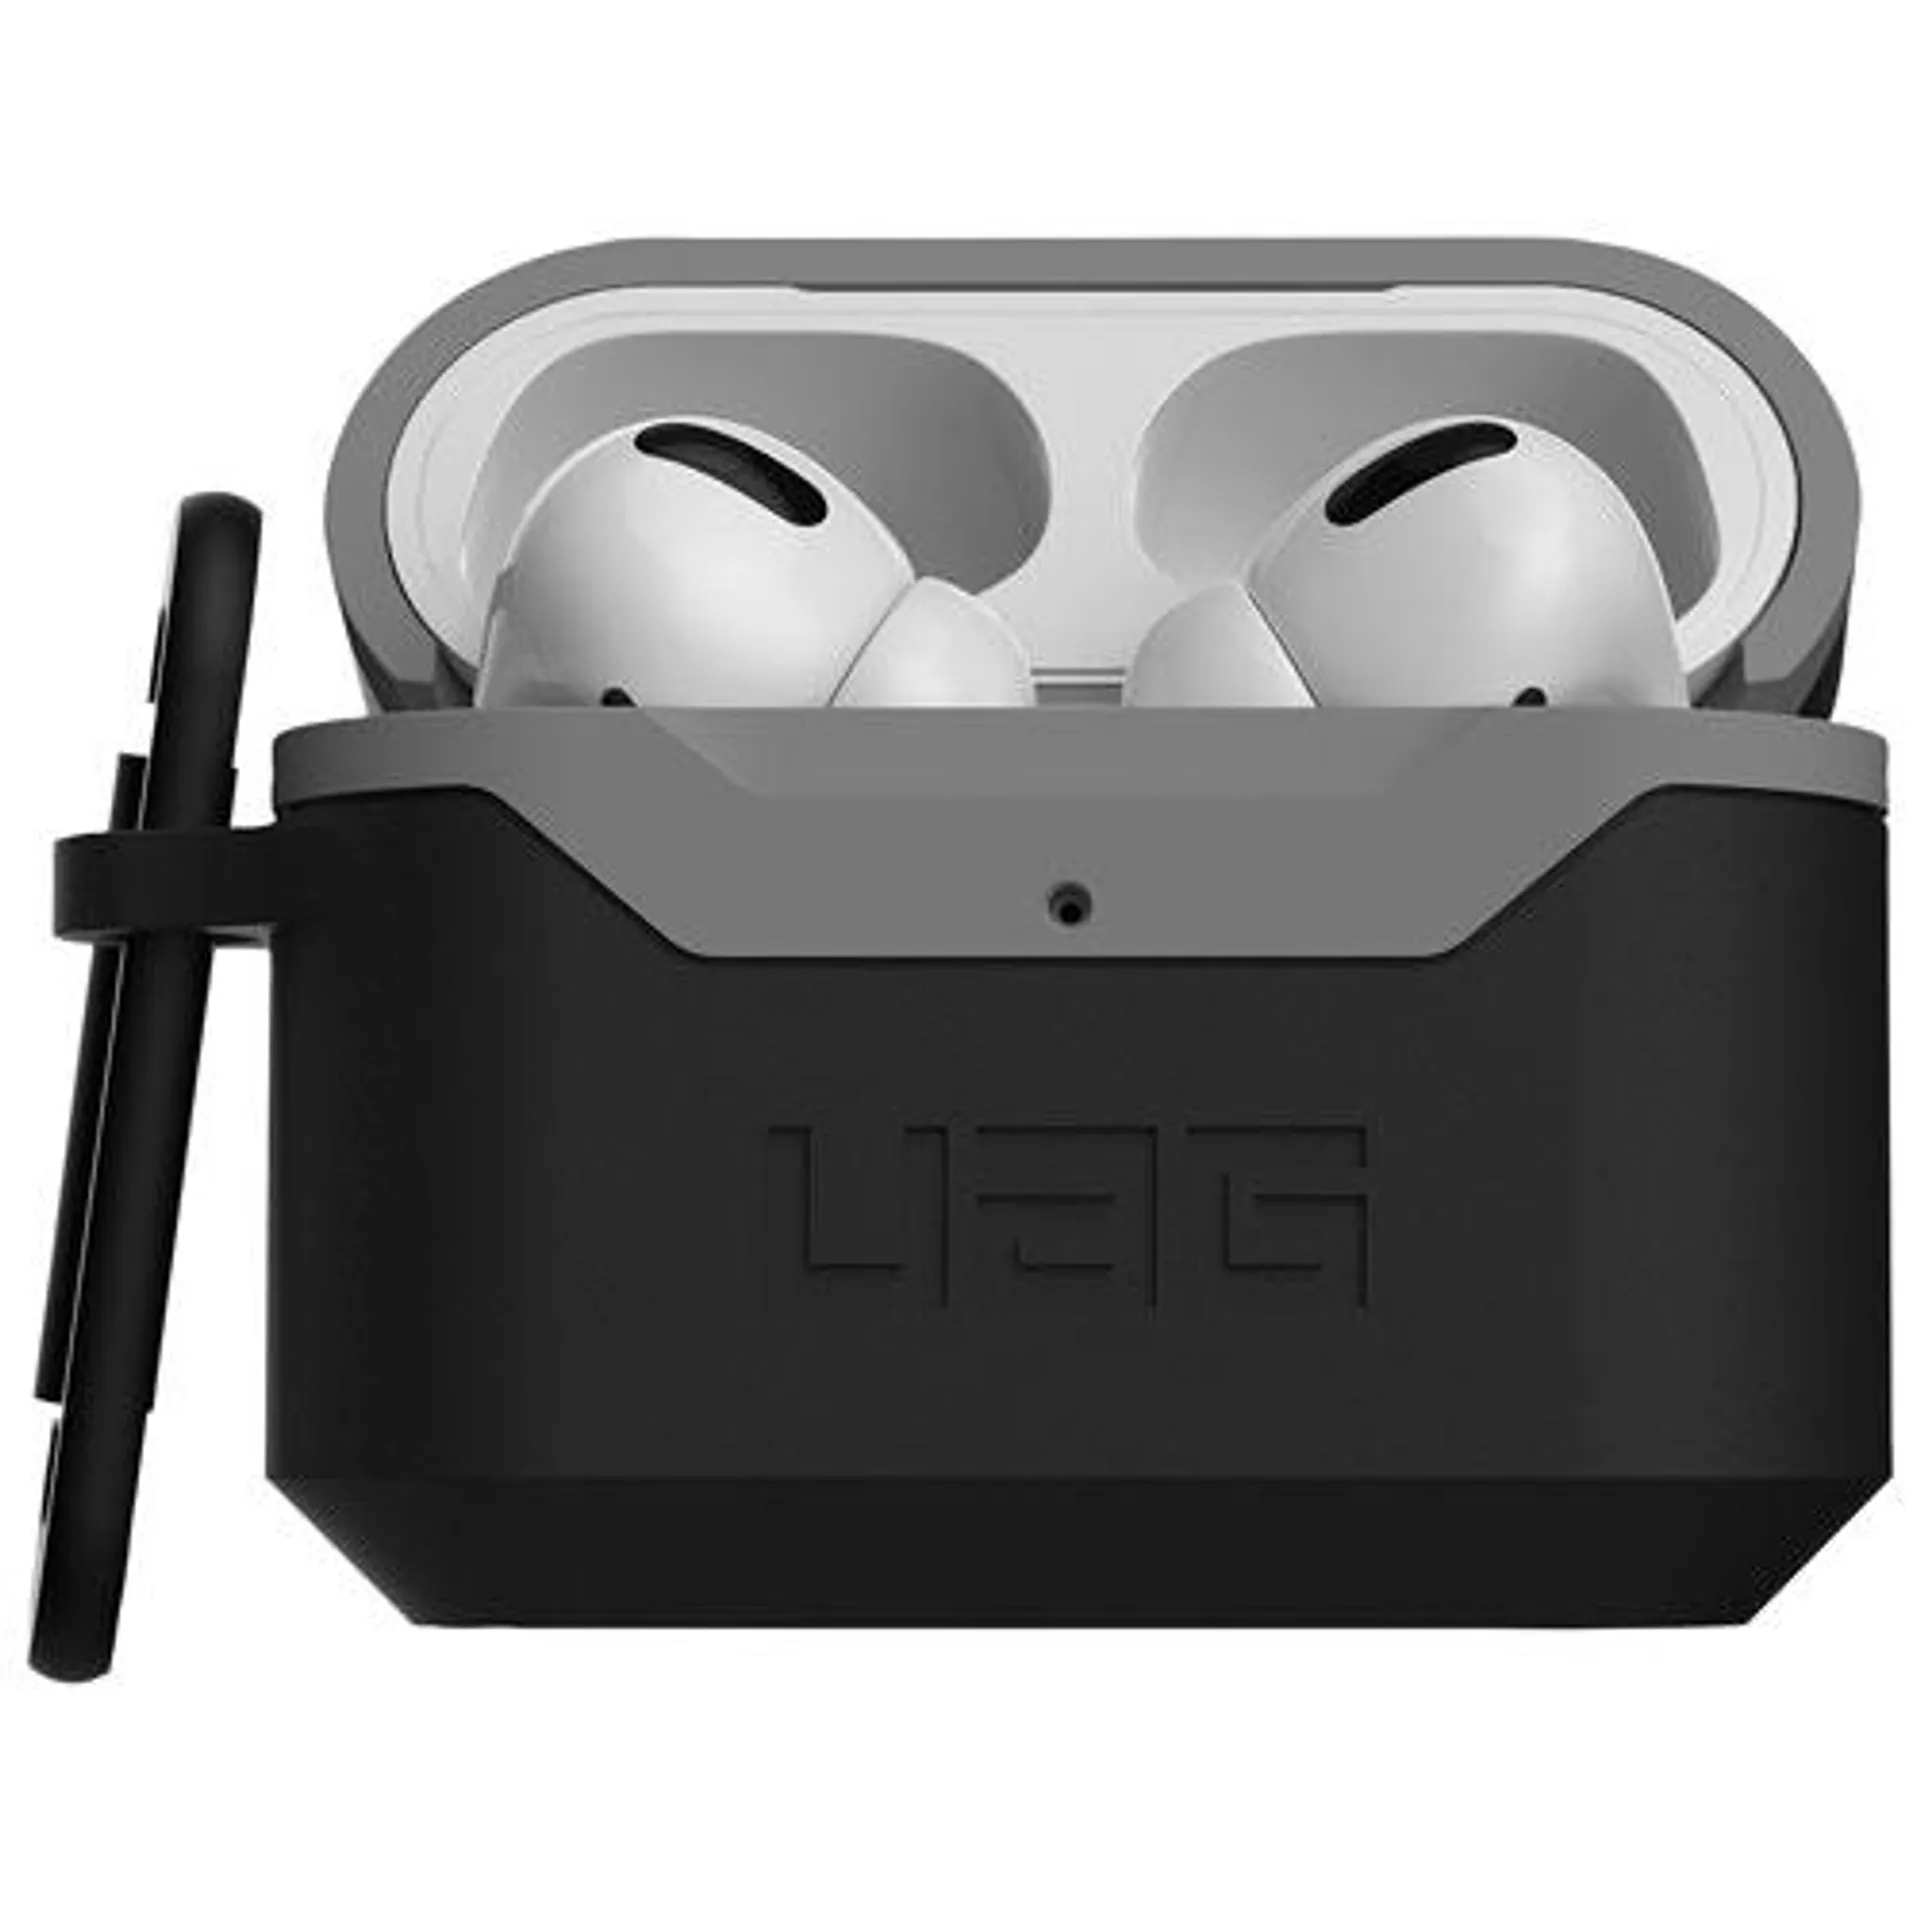 UAG Hard Shell Case for AirPods Pro - Black/Grey